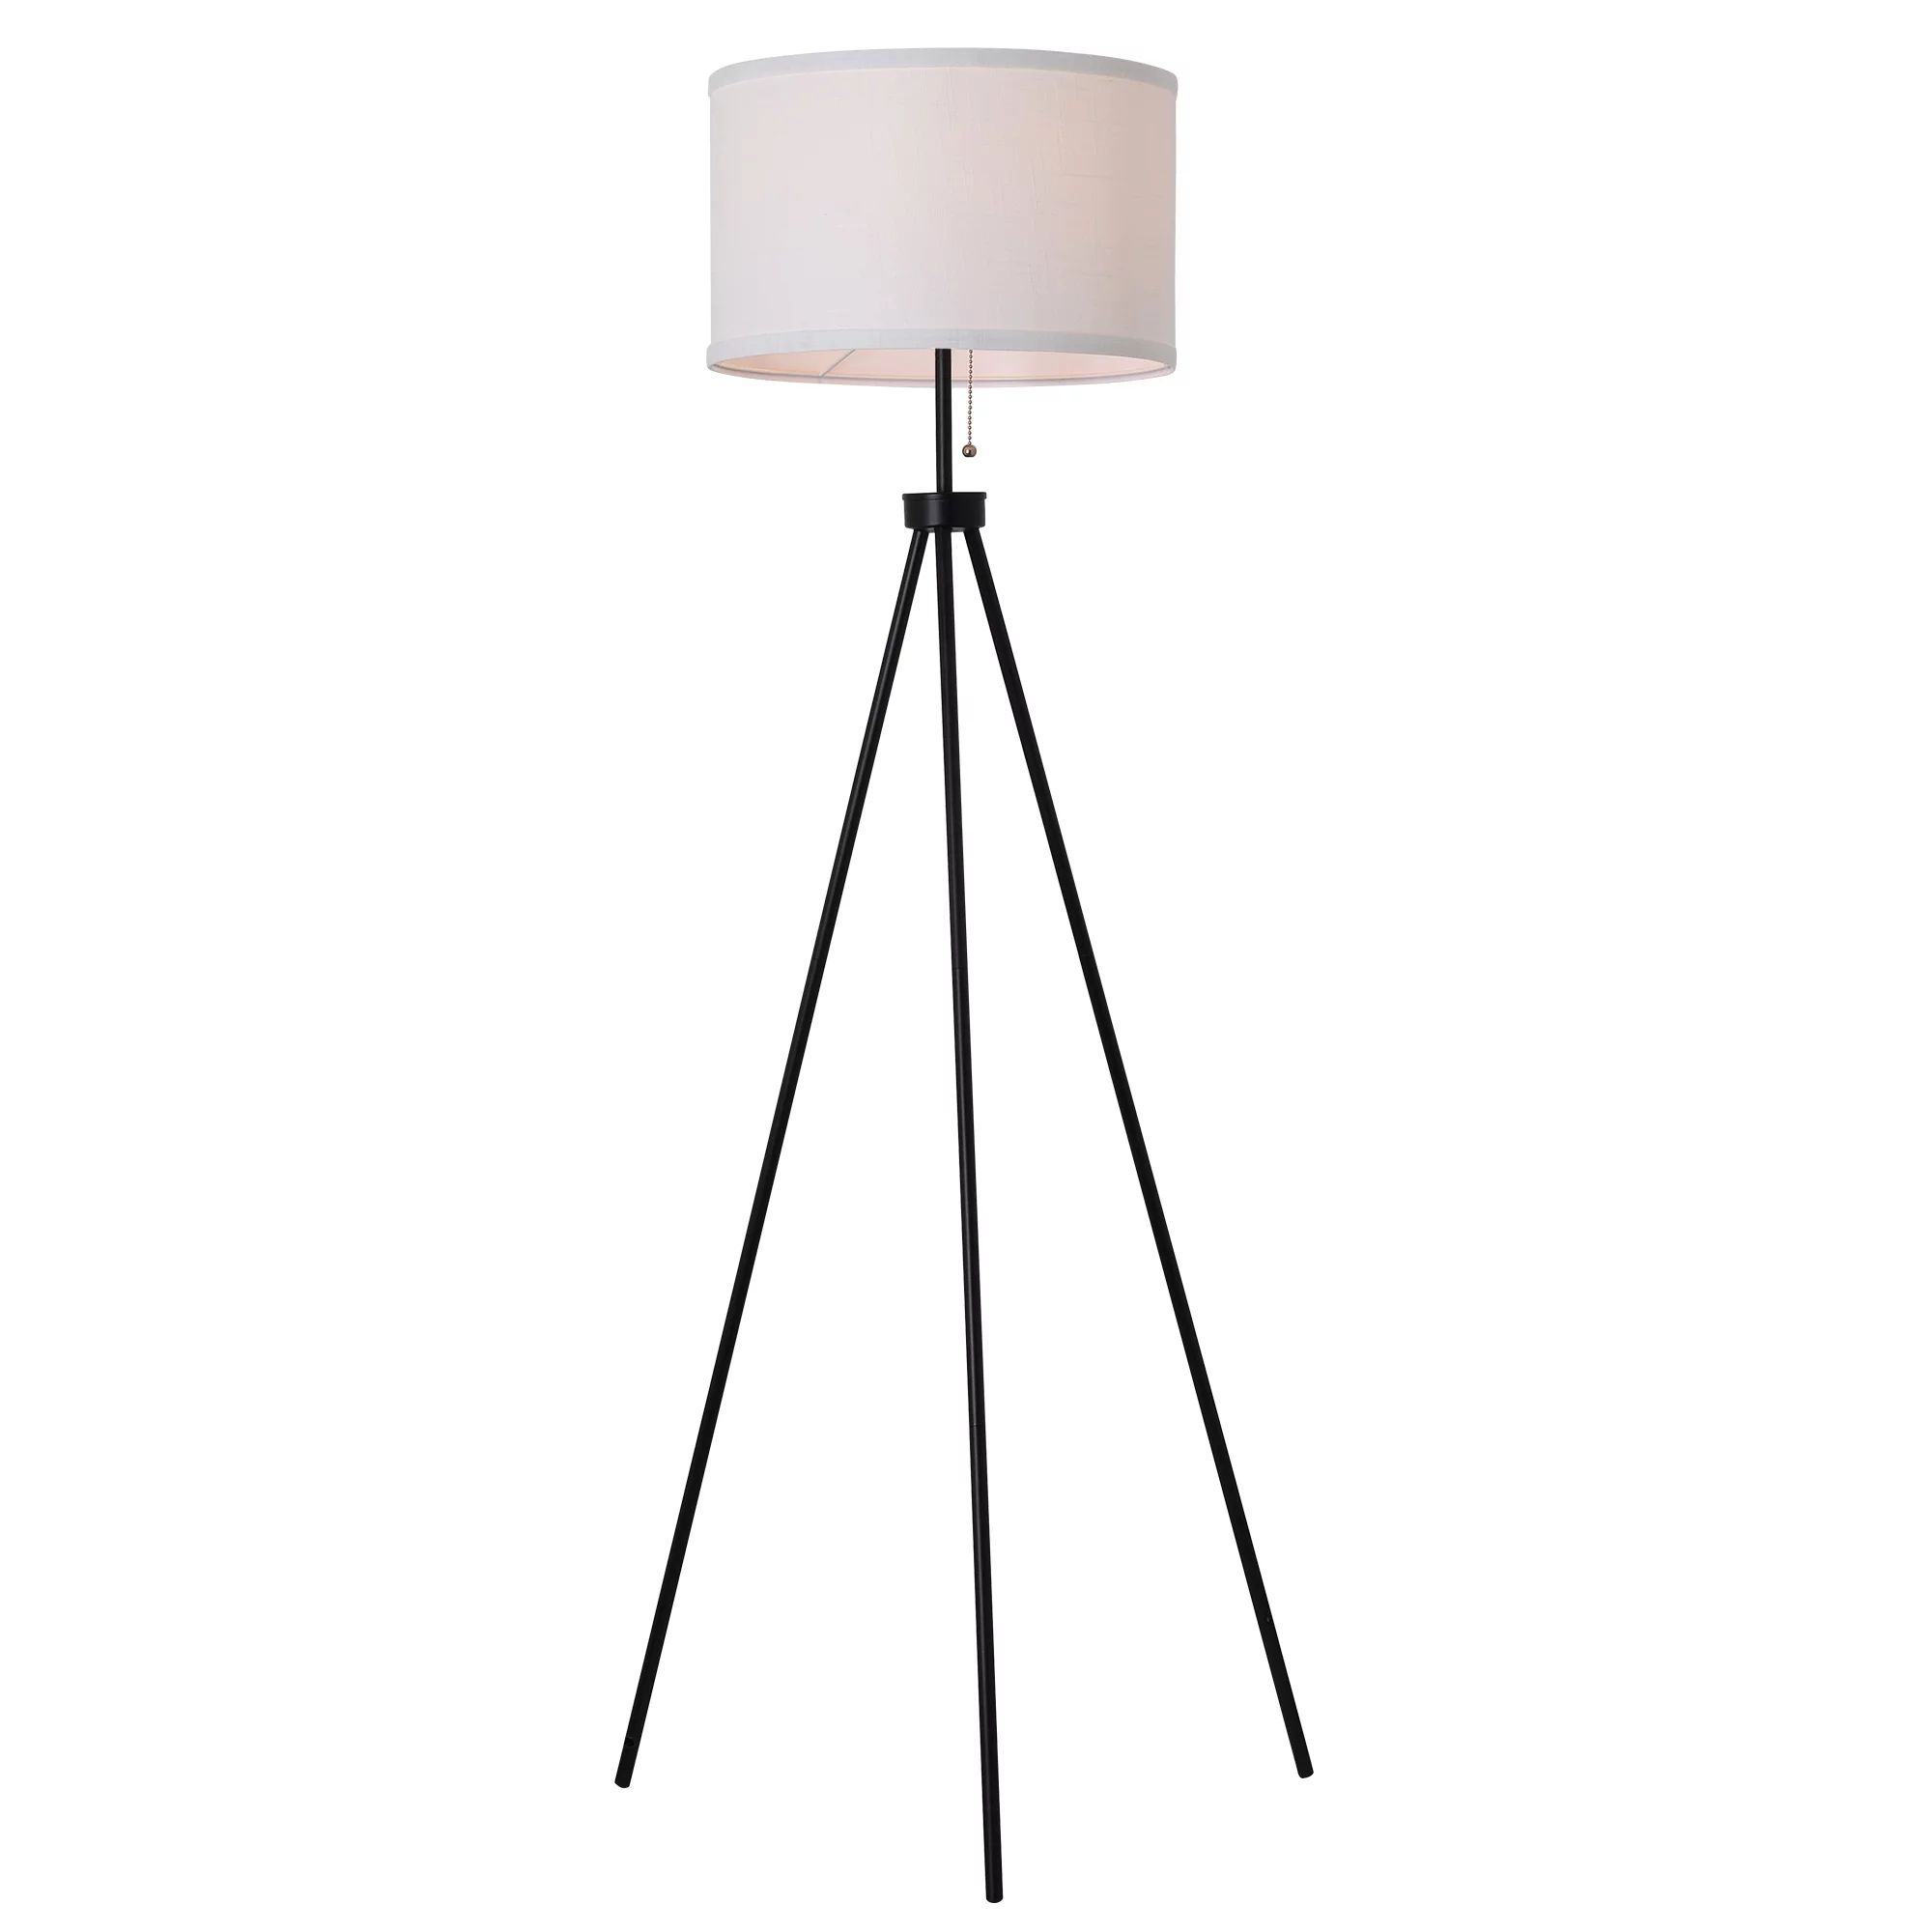 Mainstays 58" Black Metal Tripod Floor Lamp, Modern, Young Adult Dorms and Adult Home Office Use. | Walmart (US)